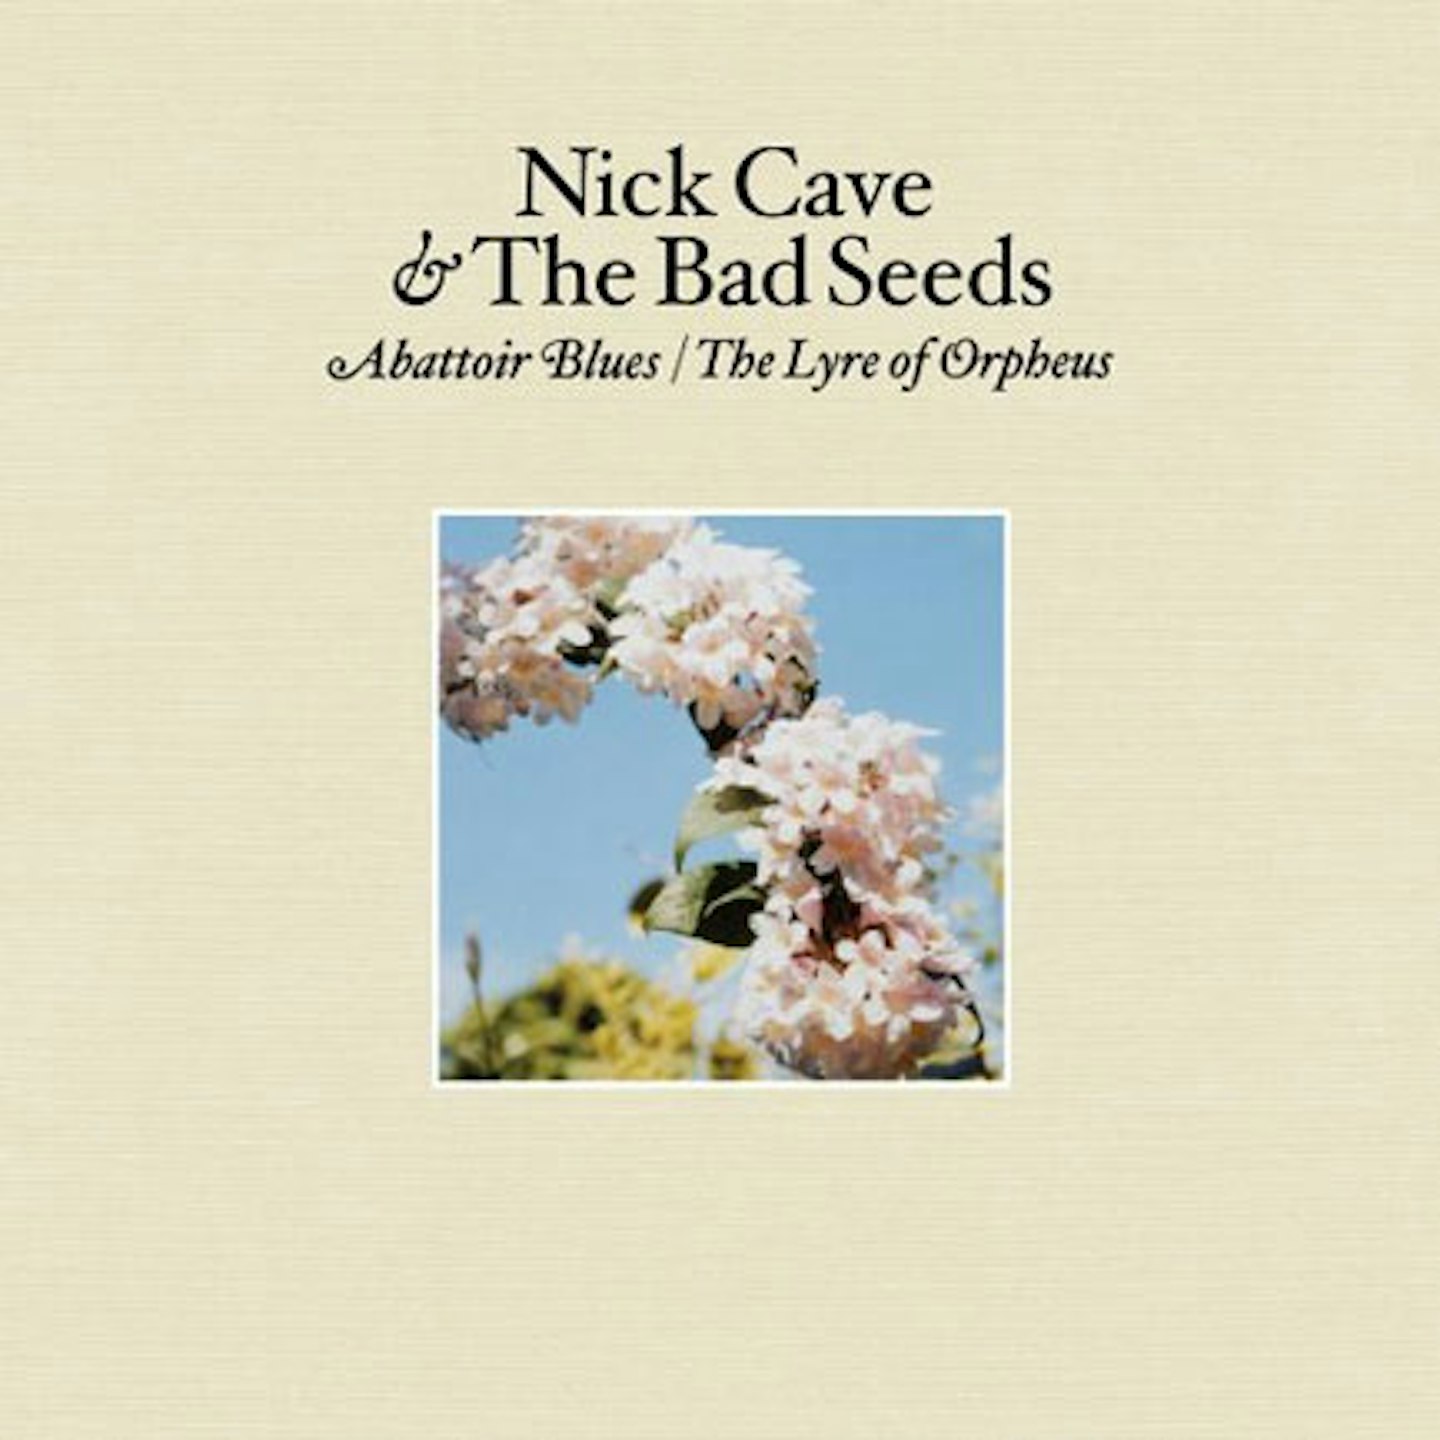 2. Abattoir Blues / The Lyre of Orpheus - Nick Cave & The Bad Seeds